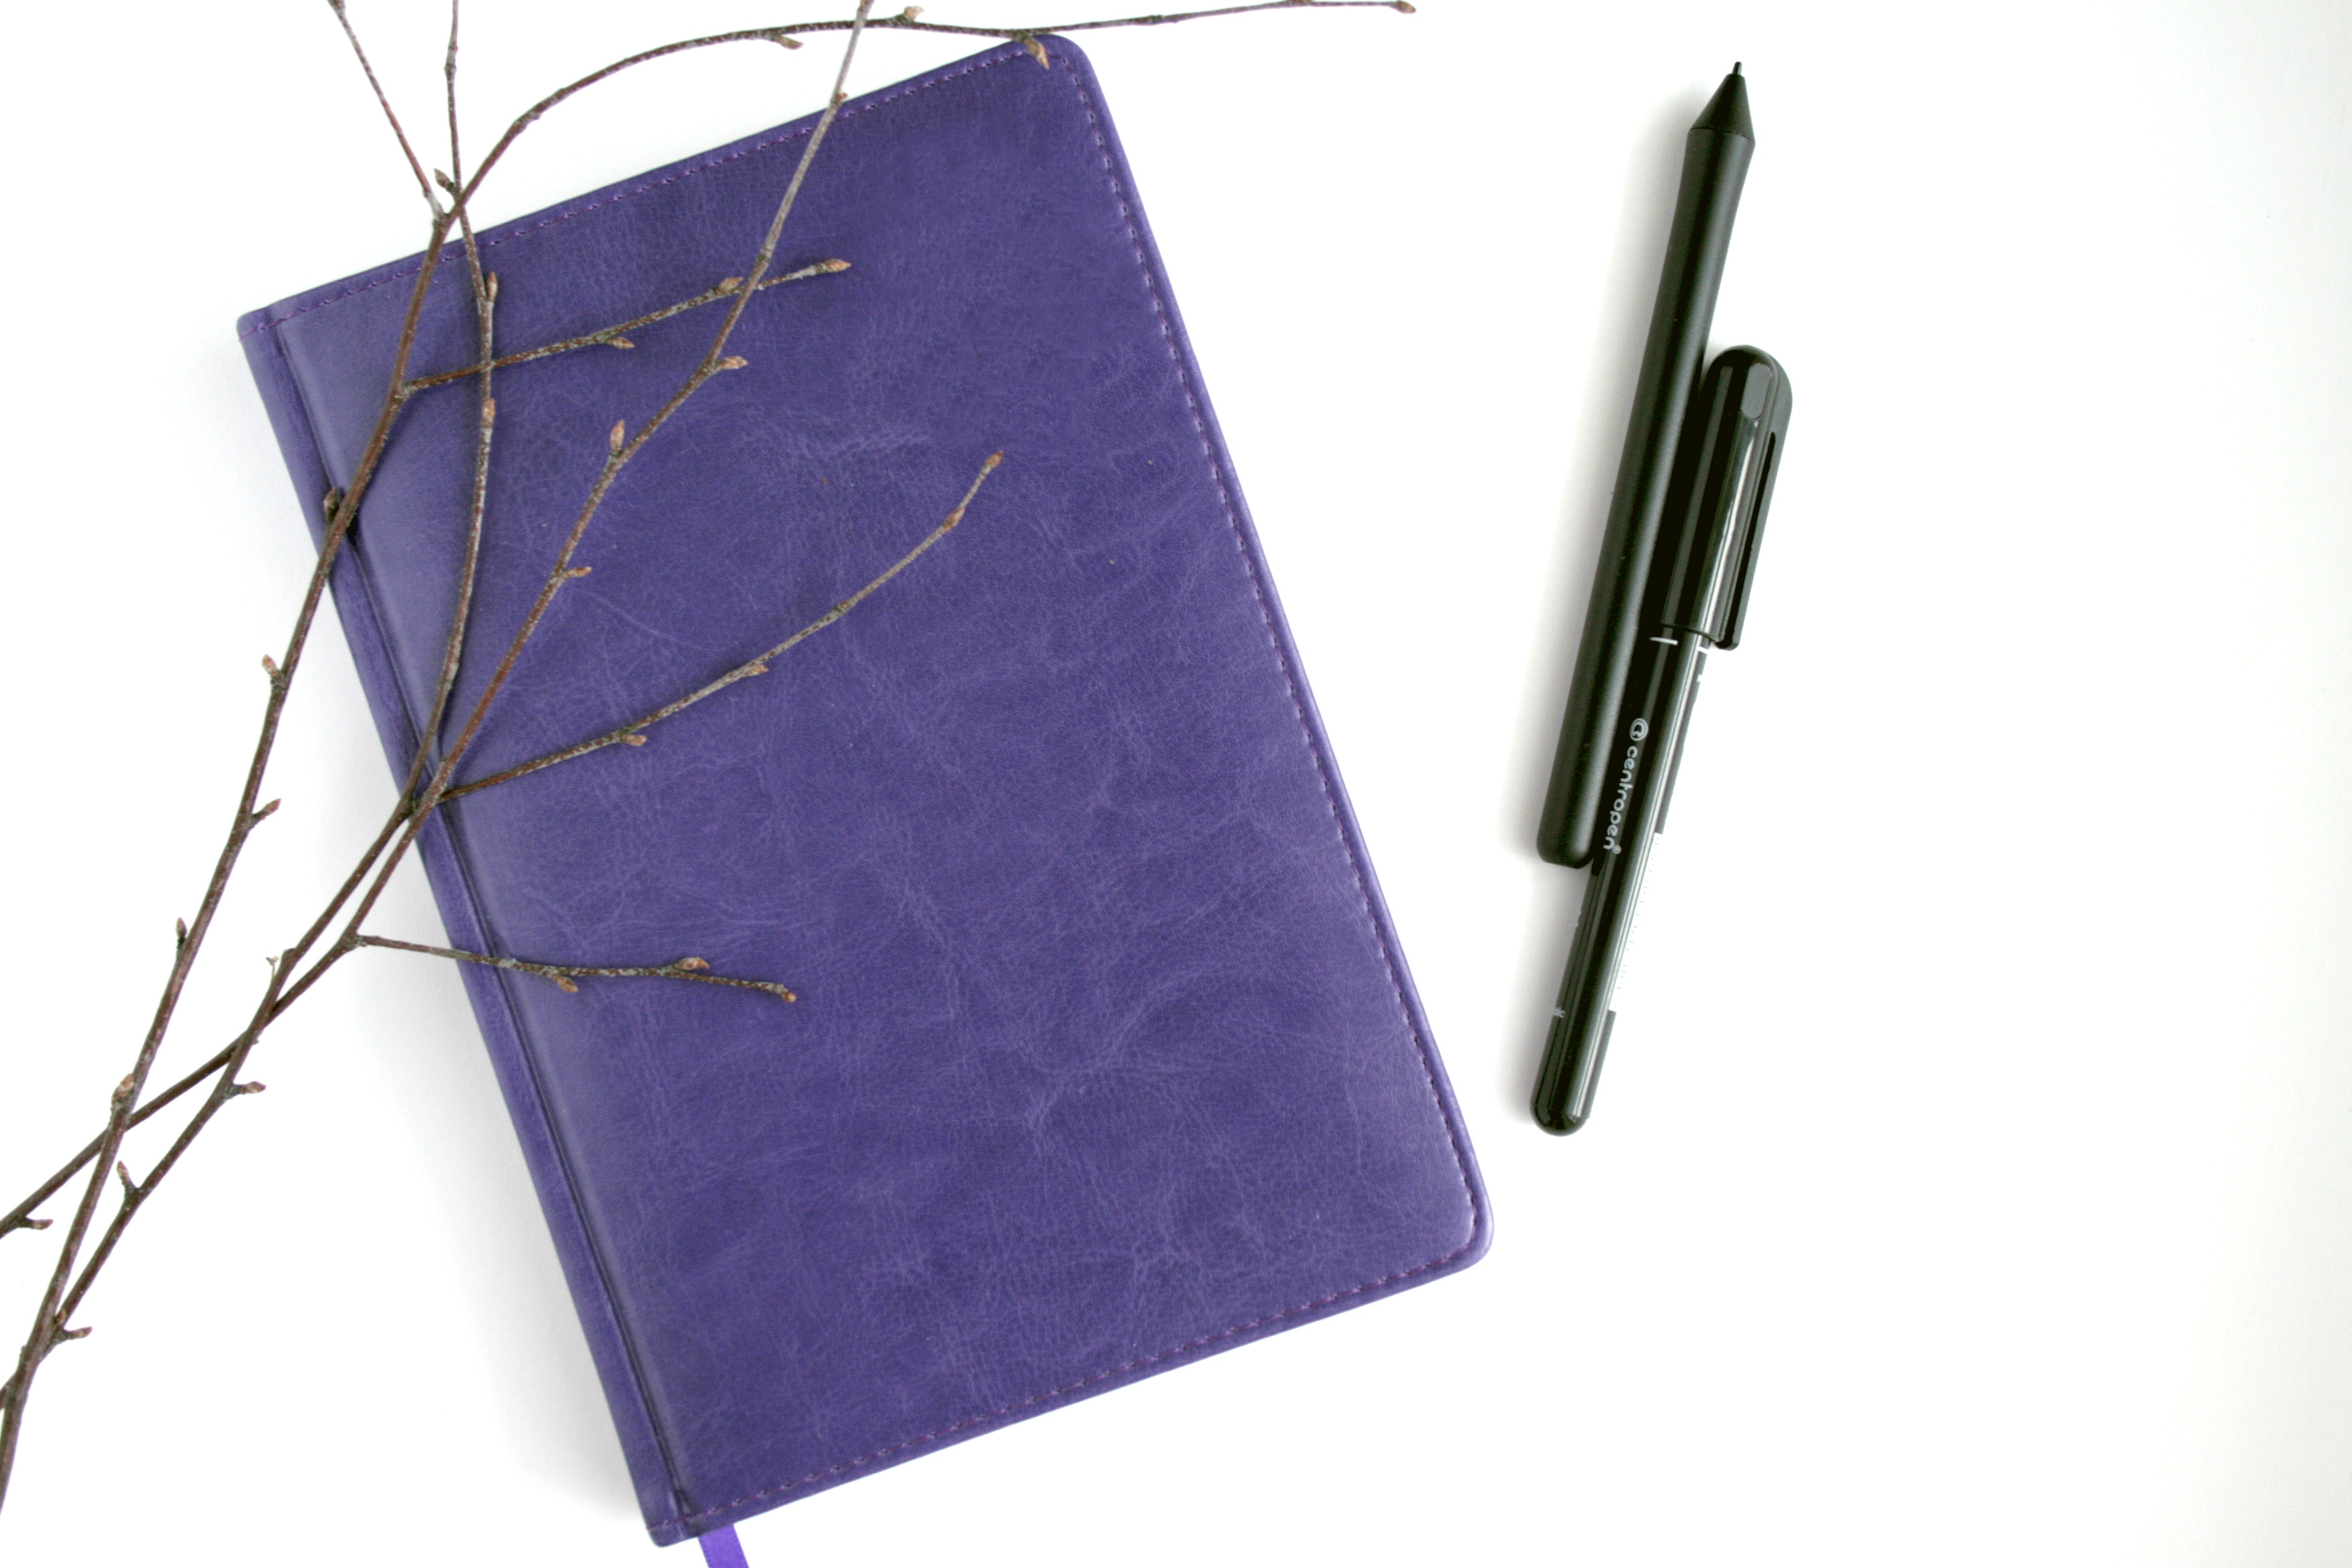 Purple Leather Notebook, Black Pen, and Brown Branches, Black, Workspace, Workplace, Working, HQ Photo